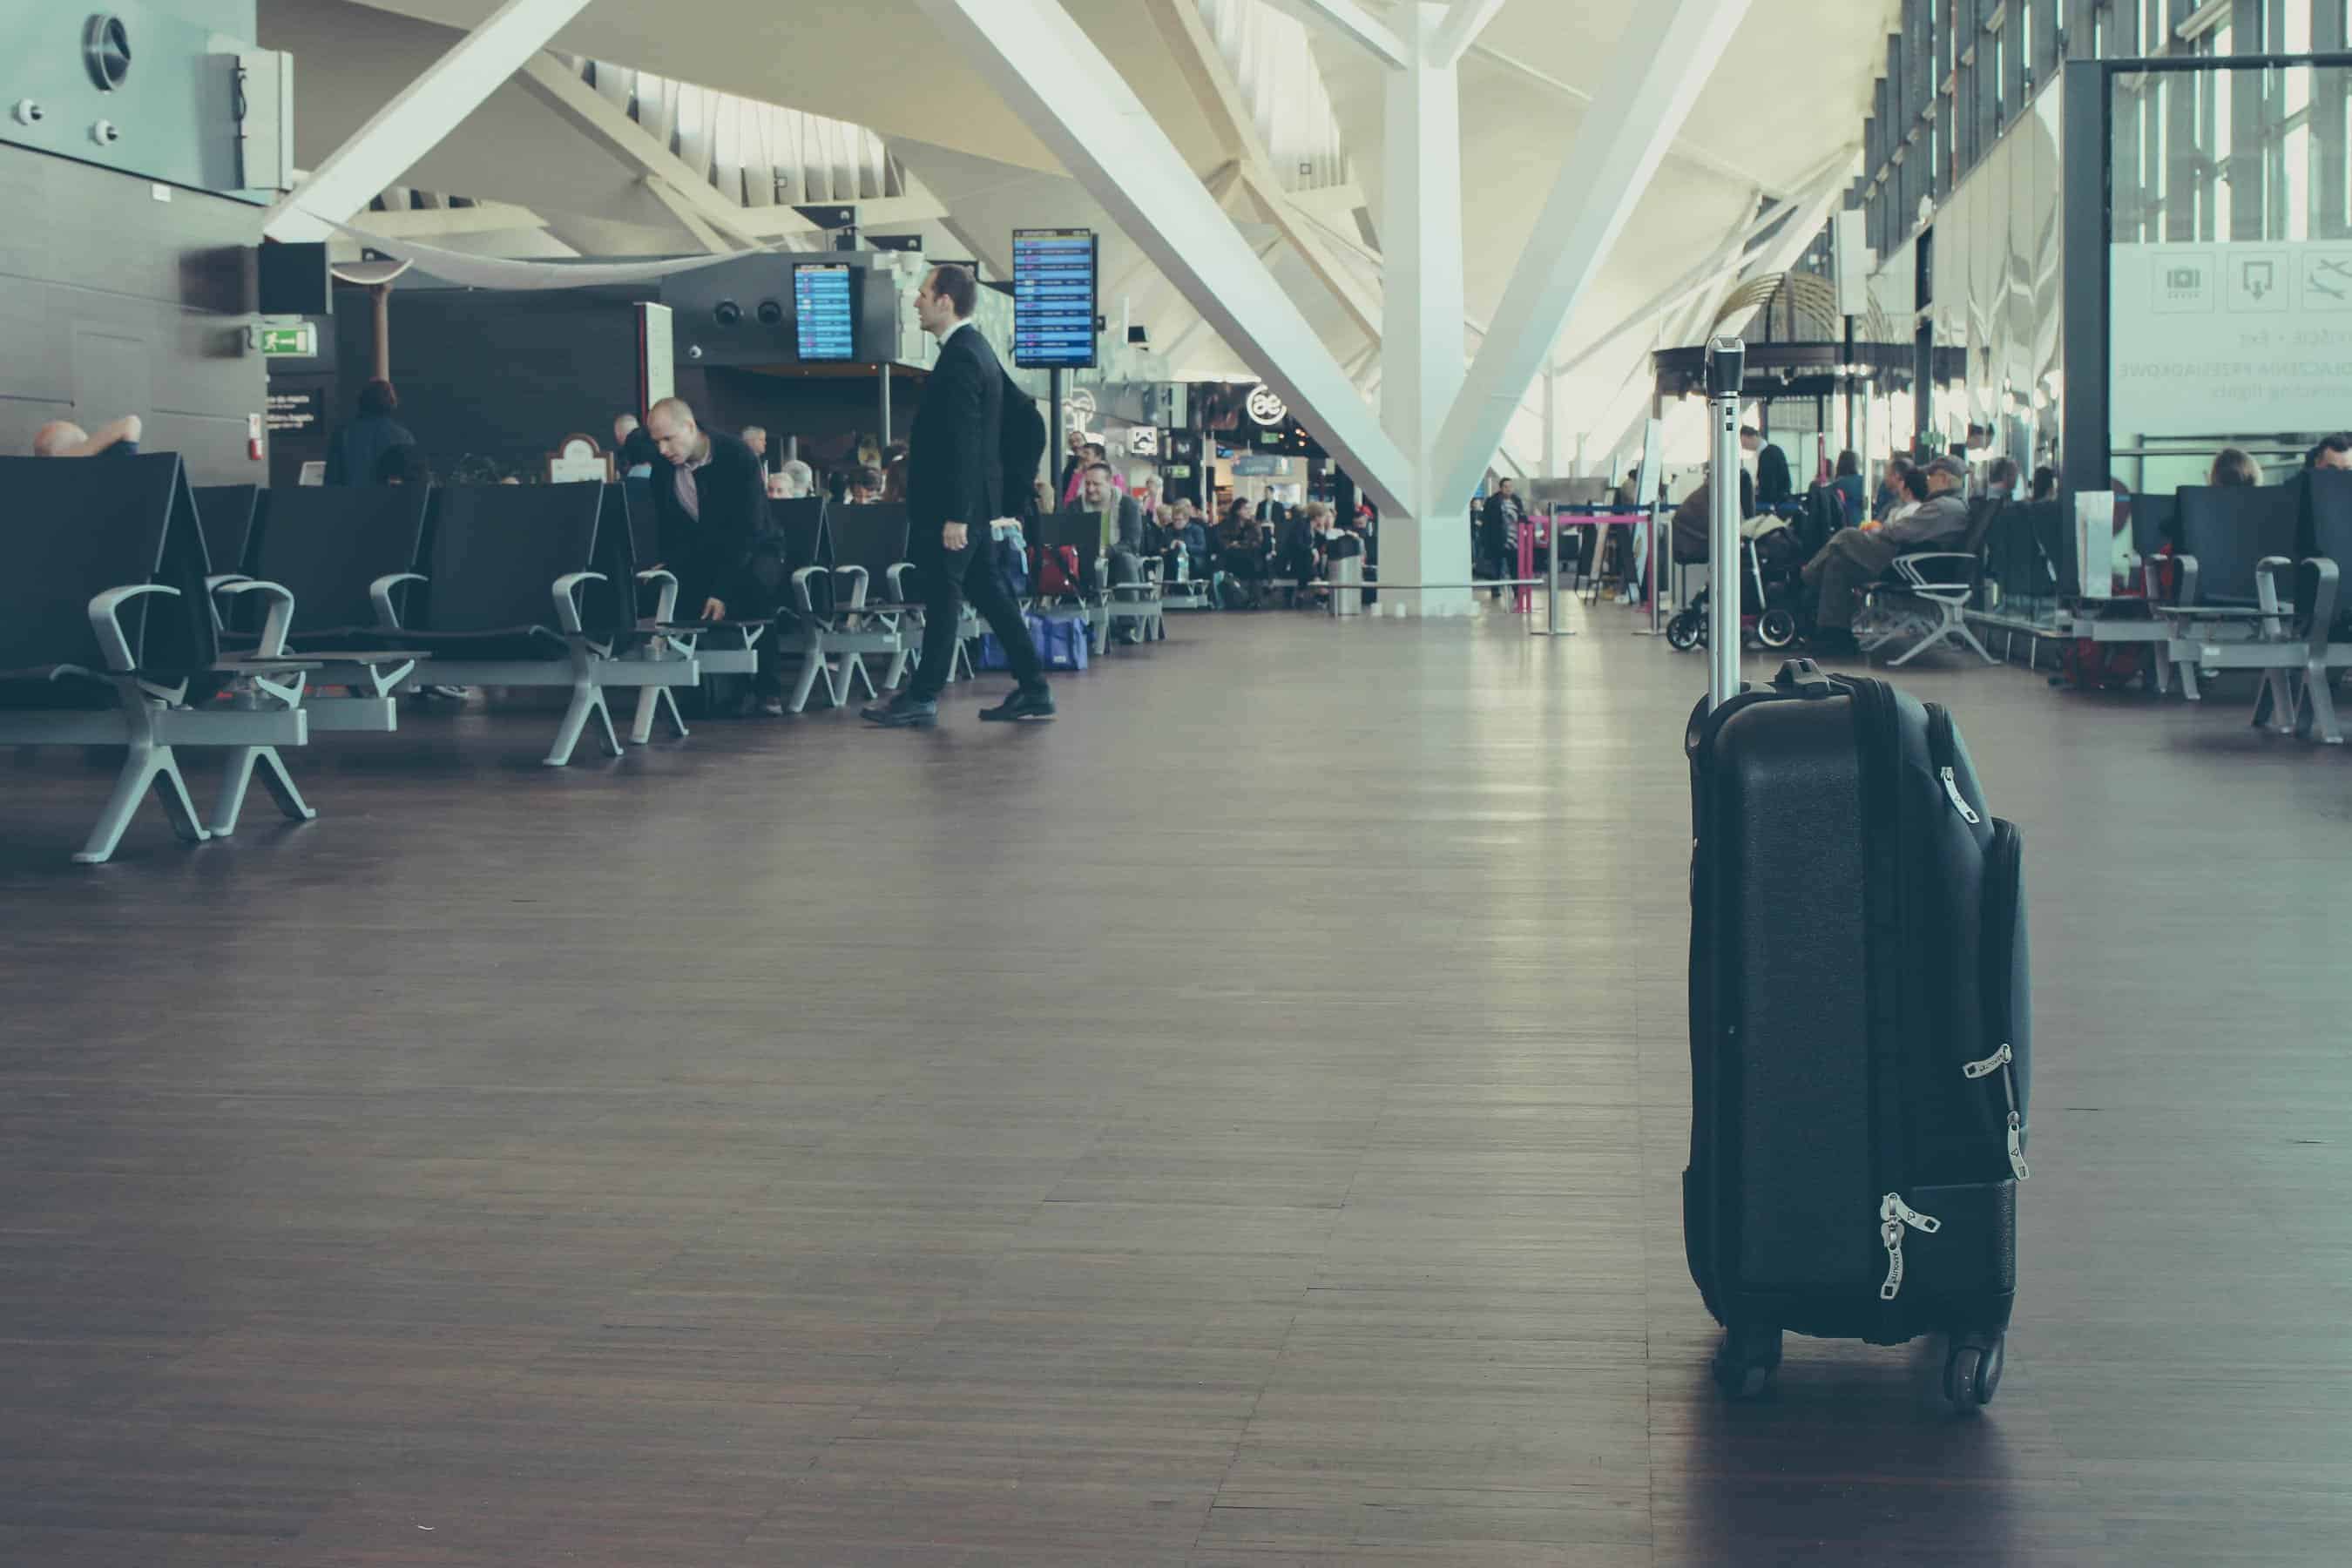 chilean startup, airkeep, allows travelers to find hosts to watch over luggage